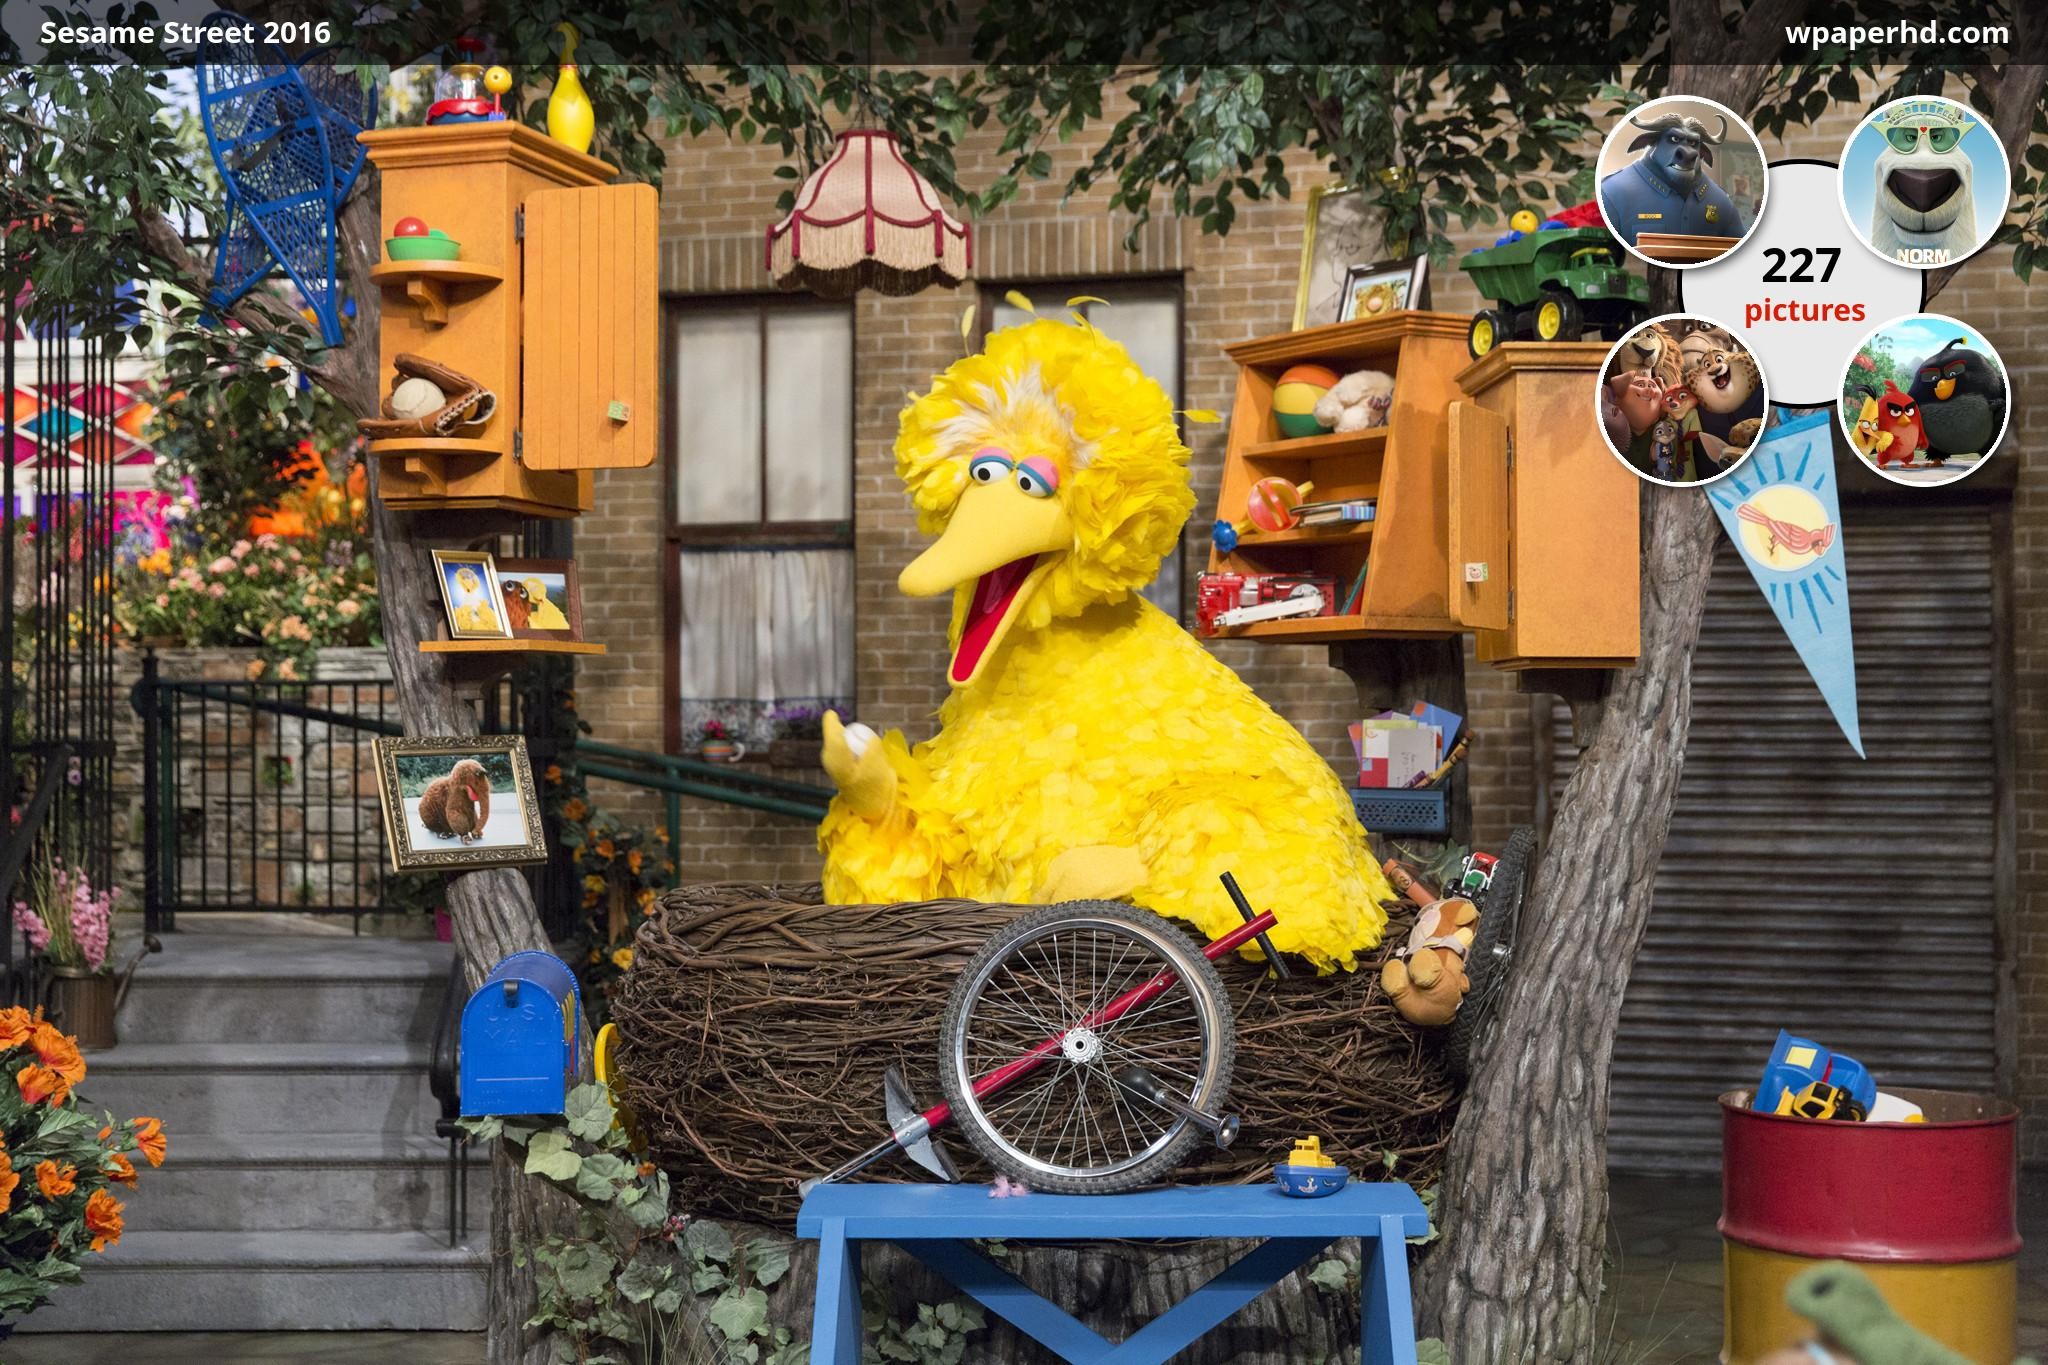 2048x1365 You are on page with Sesame Street 2016 wallpaper, where you can download  this picture in Original size and ...